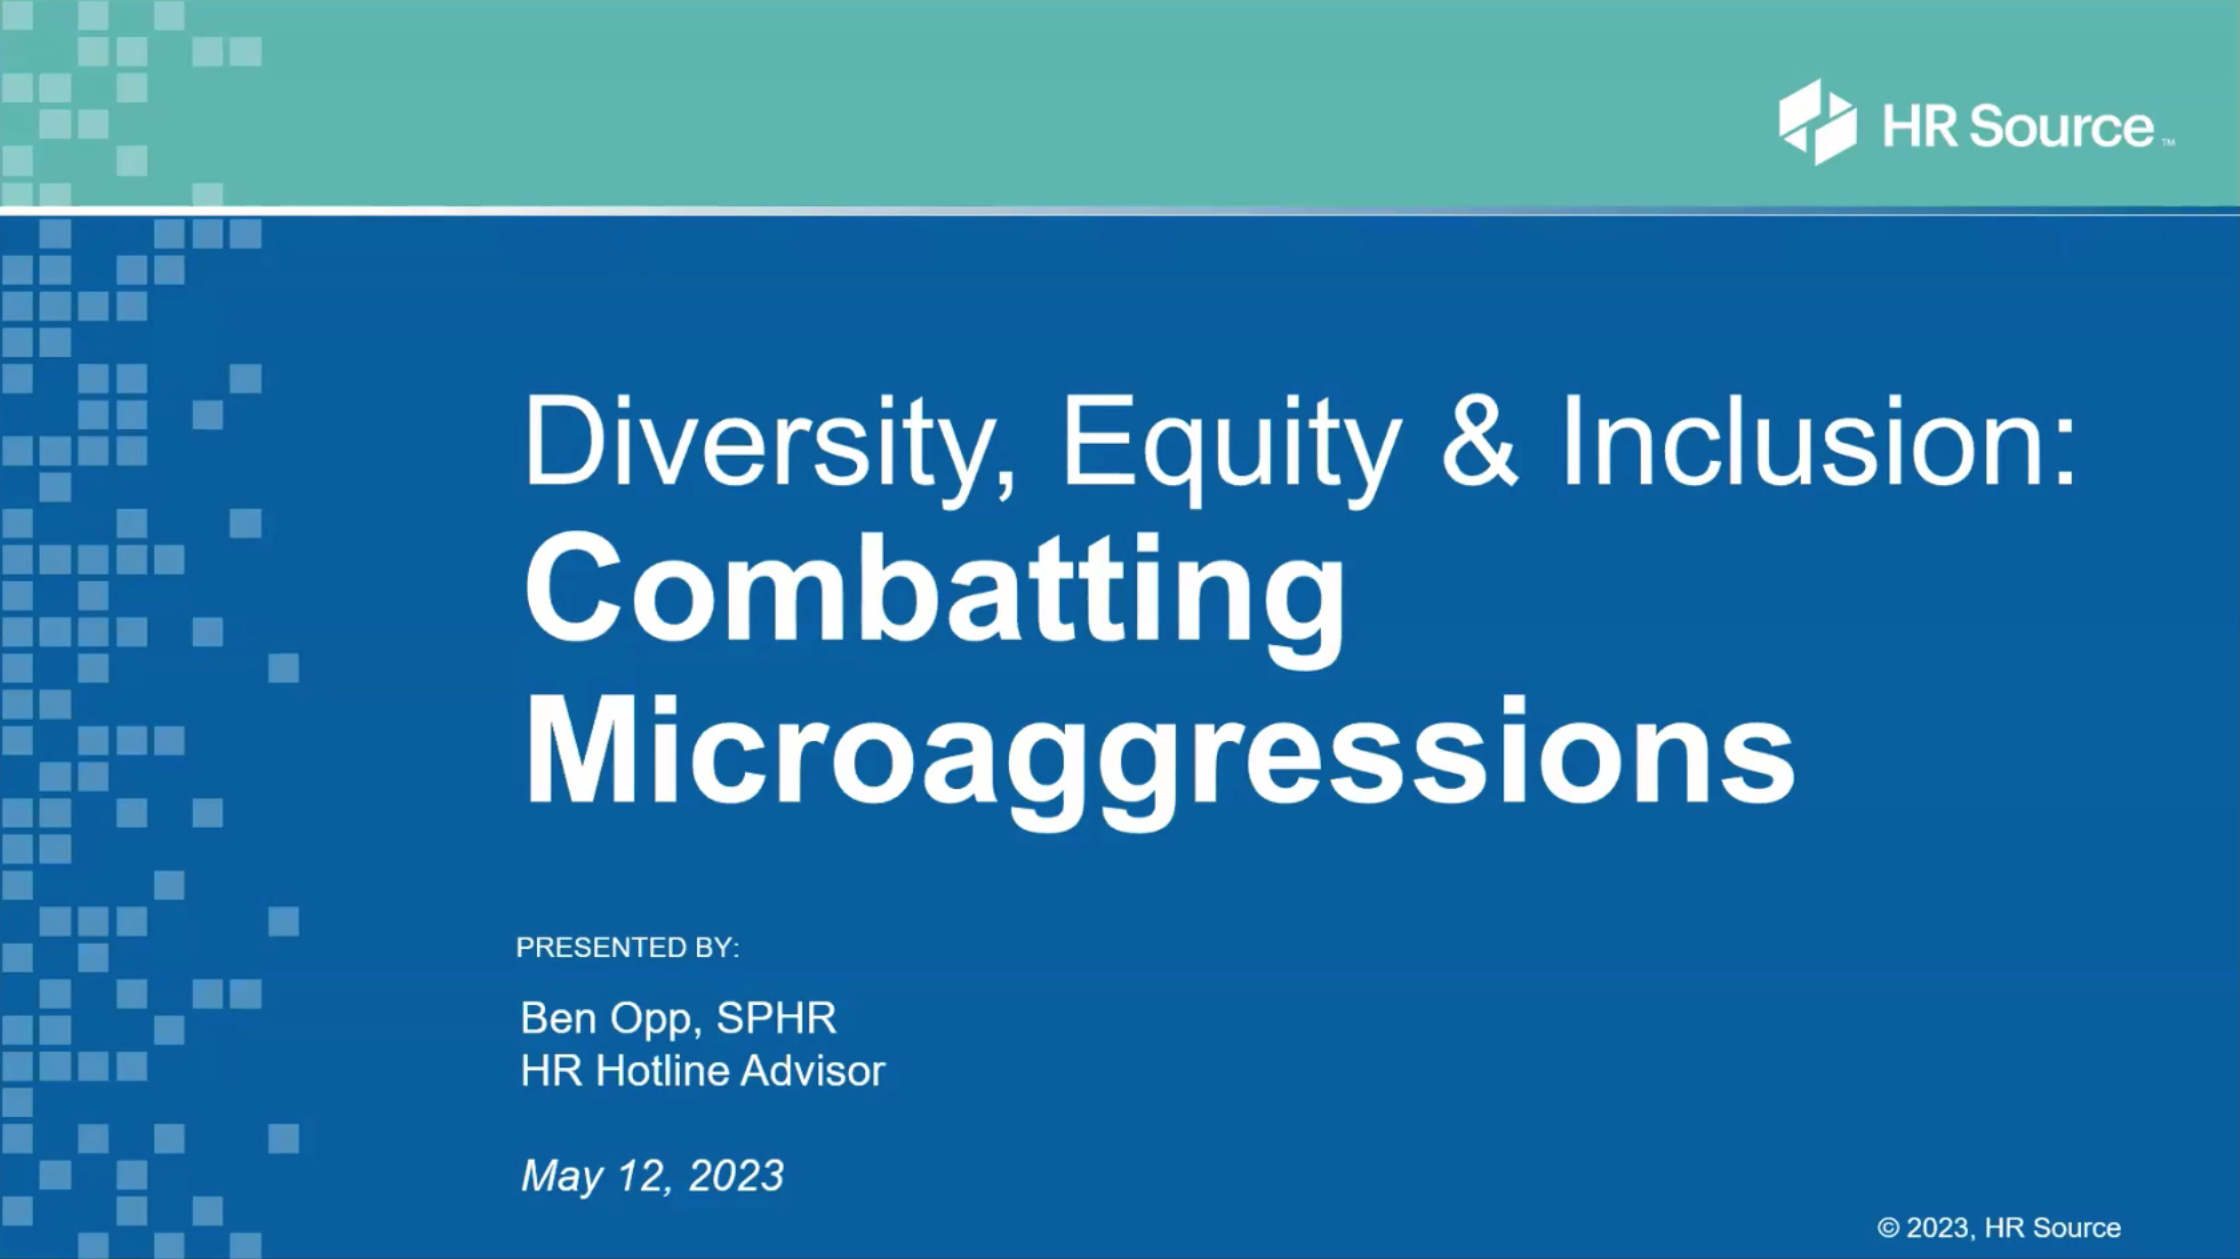 Diversity, Equity & Inclusion: Combatting Microaggressions